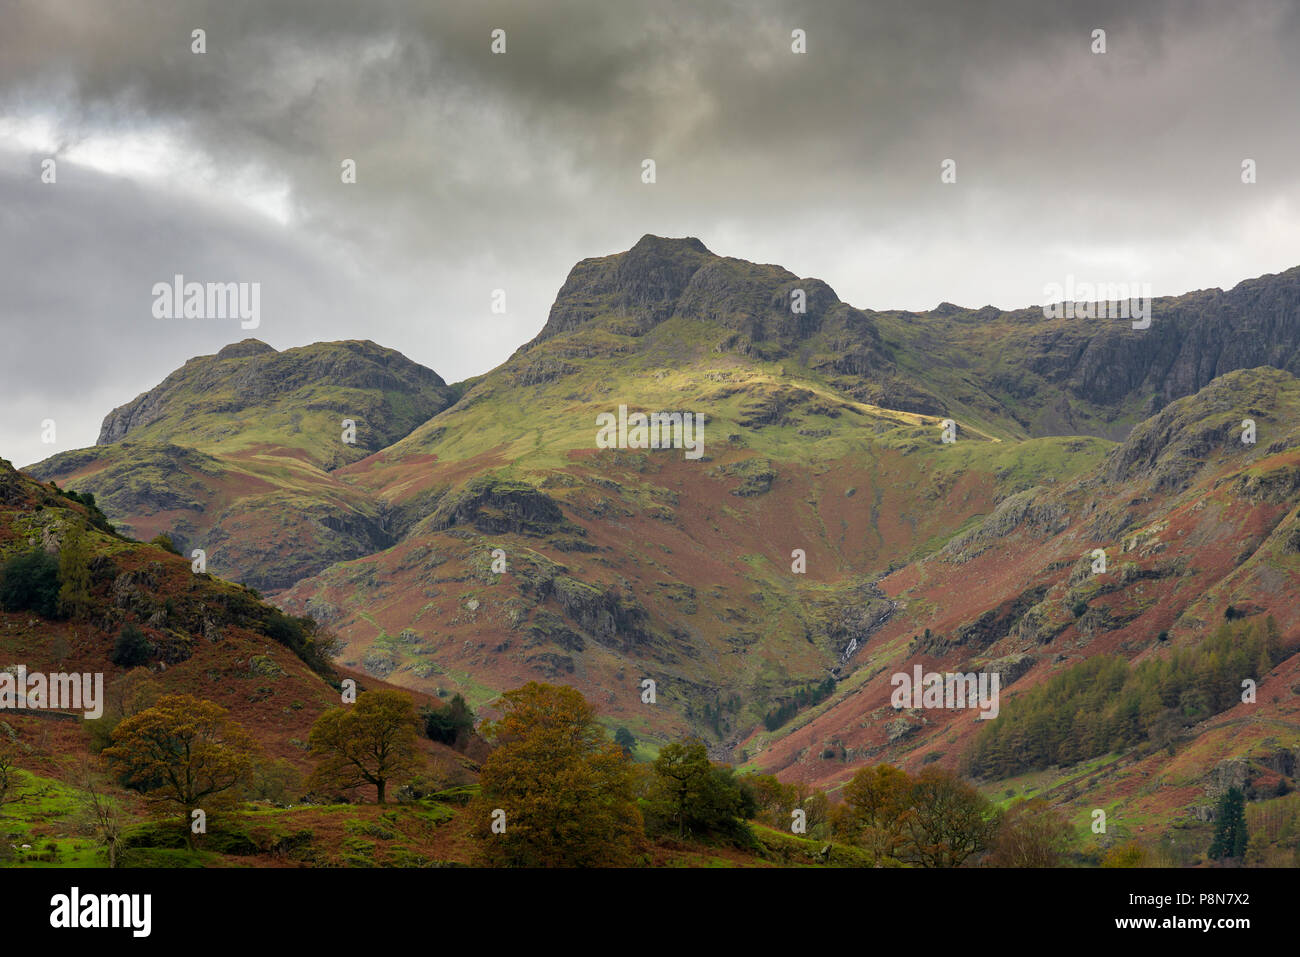 The Langdale Pikes in the Lake District National Park in Cumbria, England. Stock Photo